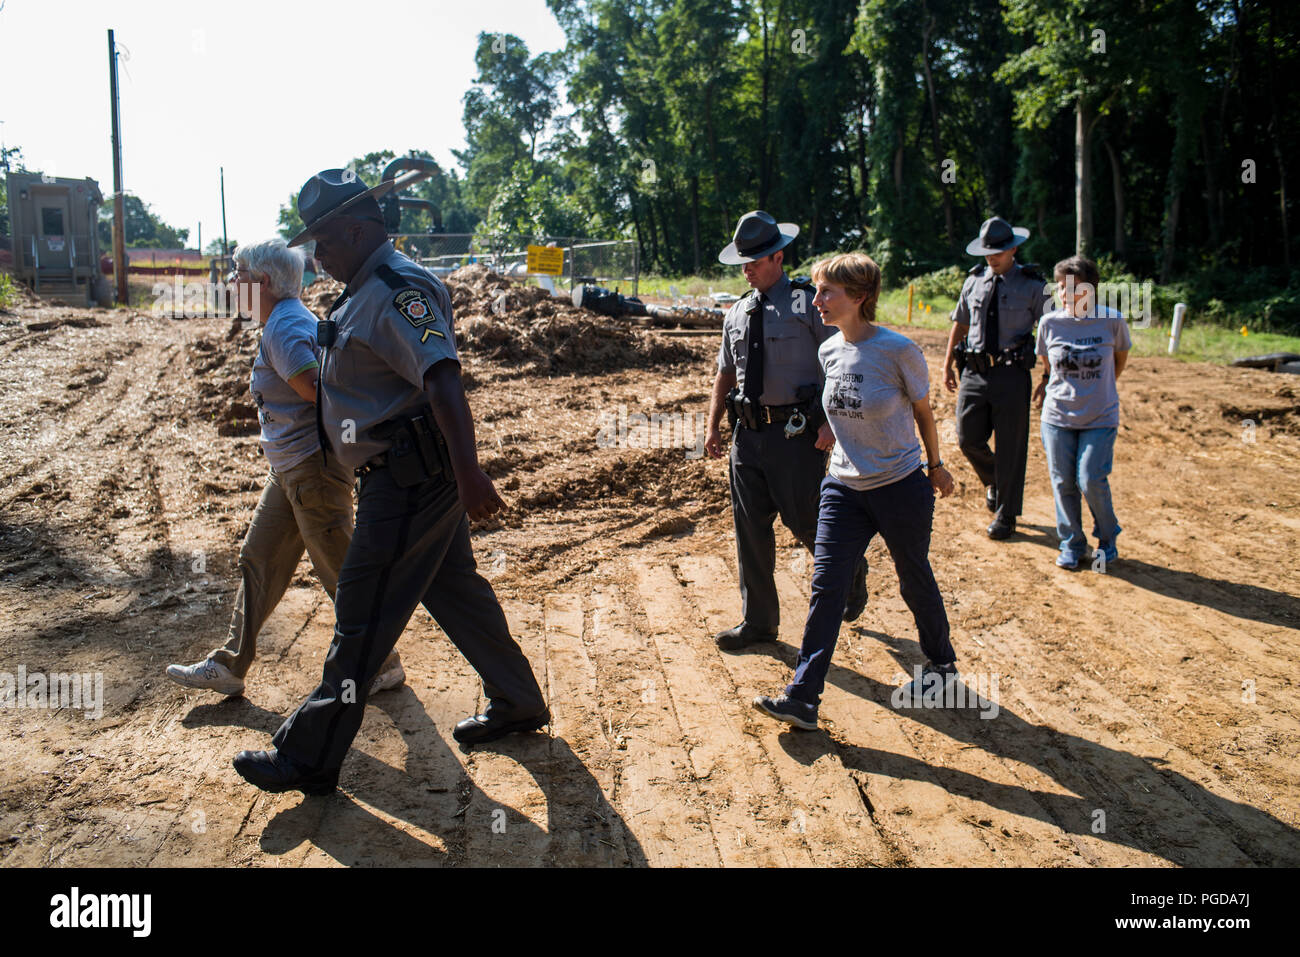 Pennsylvania, USA. 25 August 2018.  Residents held a bake sale at a pipeline construction site close to Glenwood Elemenary School in Middletown Township in protest of Sunoco's Mariner East Pipeline that threatens the safety of residents, students and daycare centers through a densley populated area. Three people were eventually arrested by state police for refusing to disperse following a lawful order. August 25 2018. Photo Credit: Chris Baker Evens. Credit: Christopher Evens/Alamy Live News Stock Photo